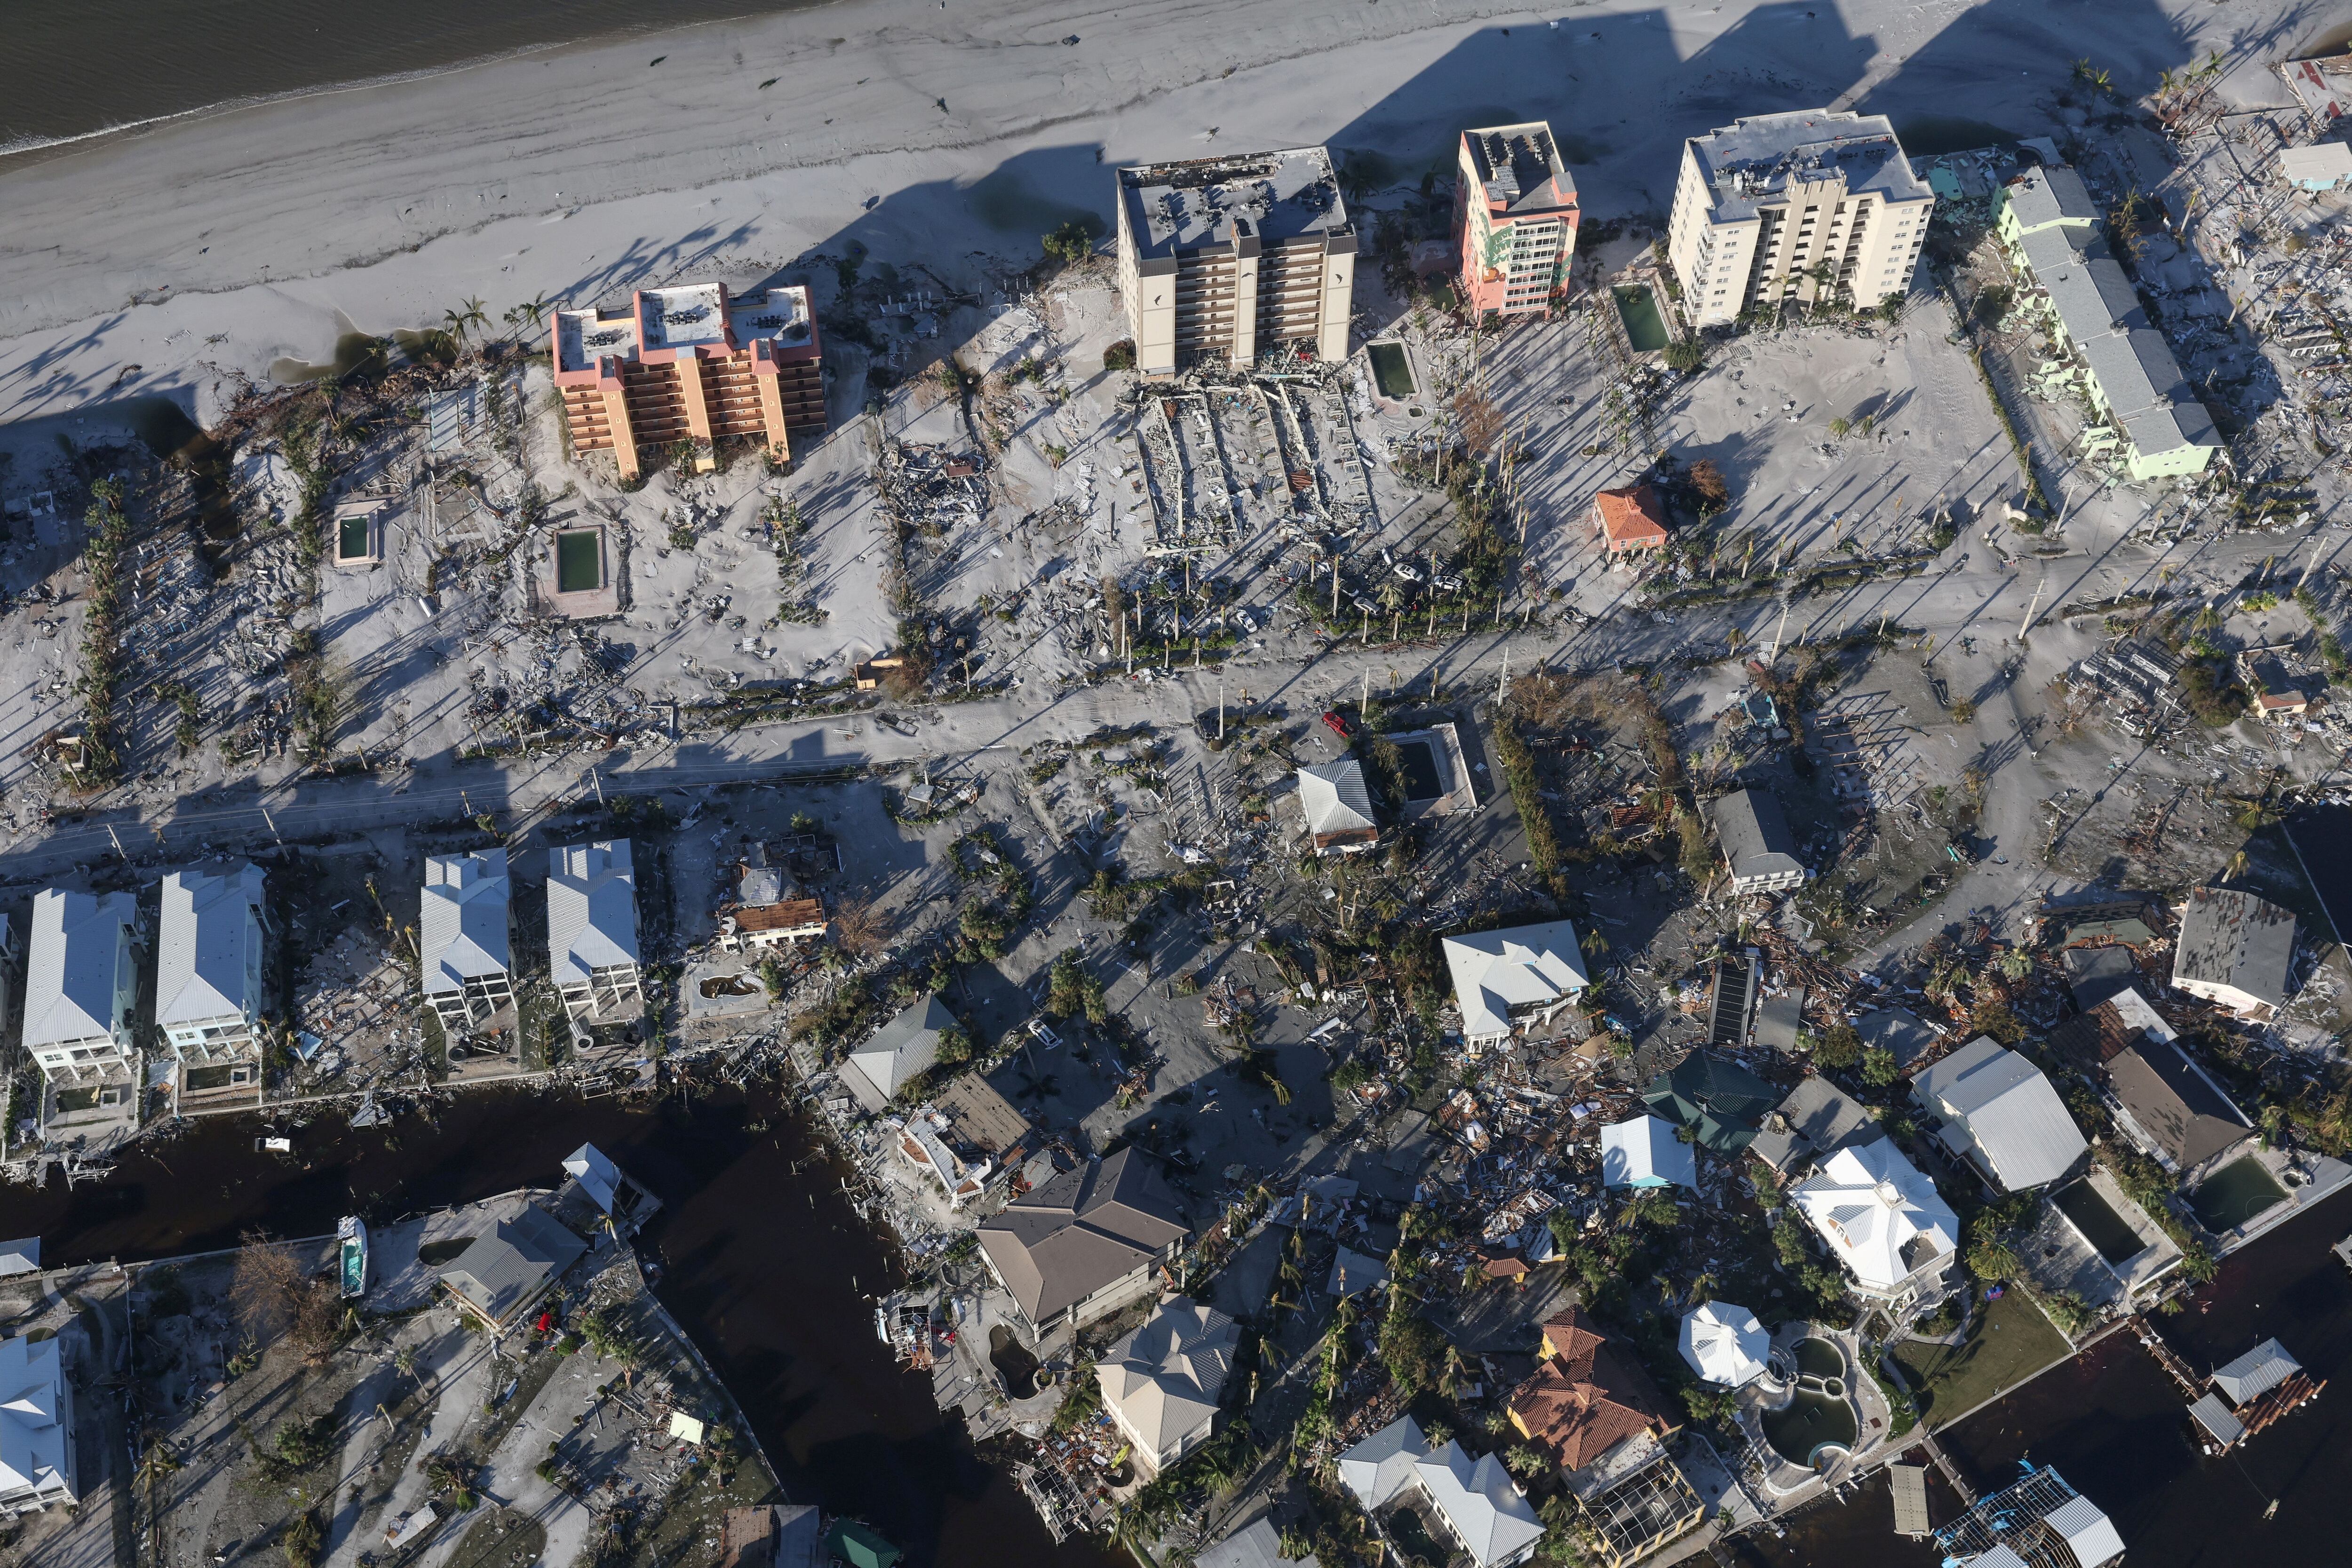 An aerial view of damaged properties after Hurricane Ian caused widespread destruction, in Fort Meyers Beach, Florida, U.S., September 30, 2022. REUTERS/Shannon Stapleton